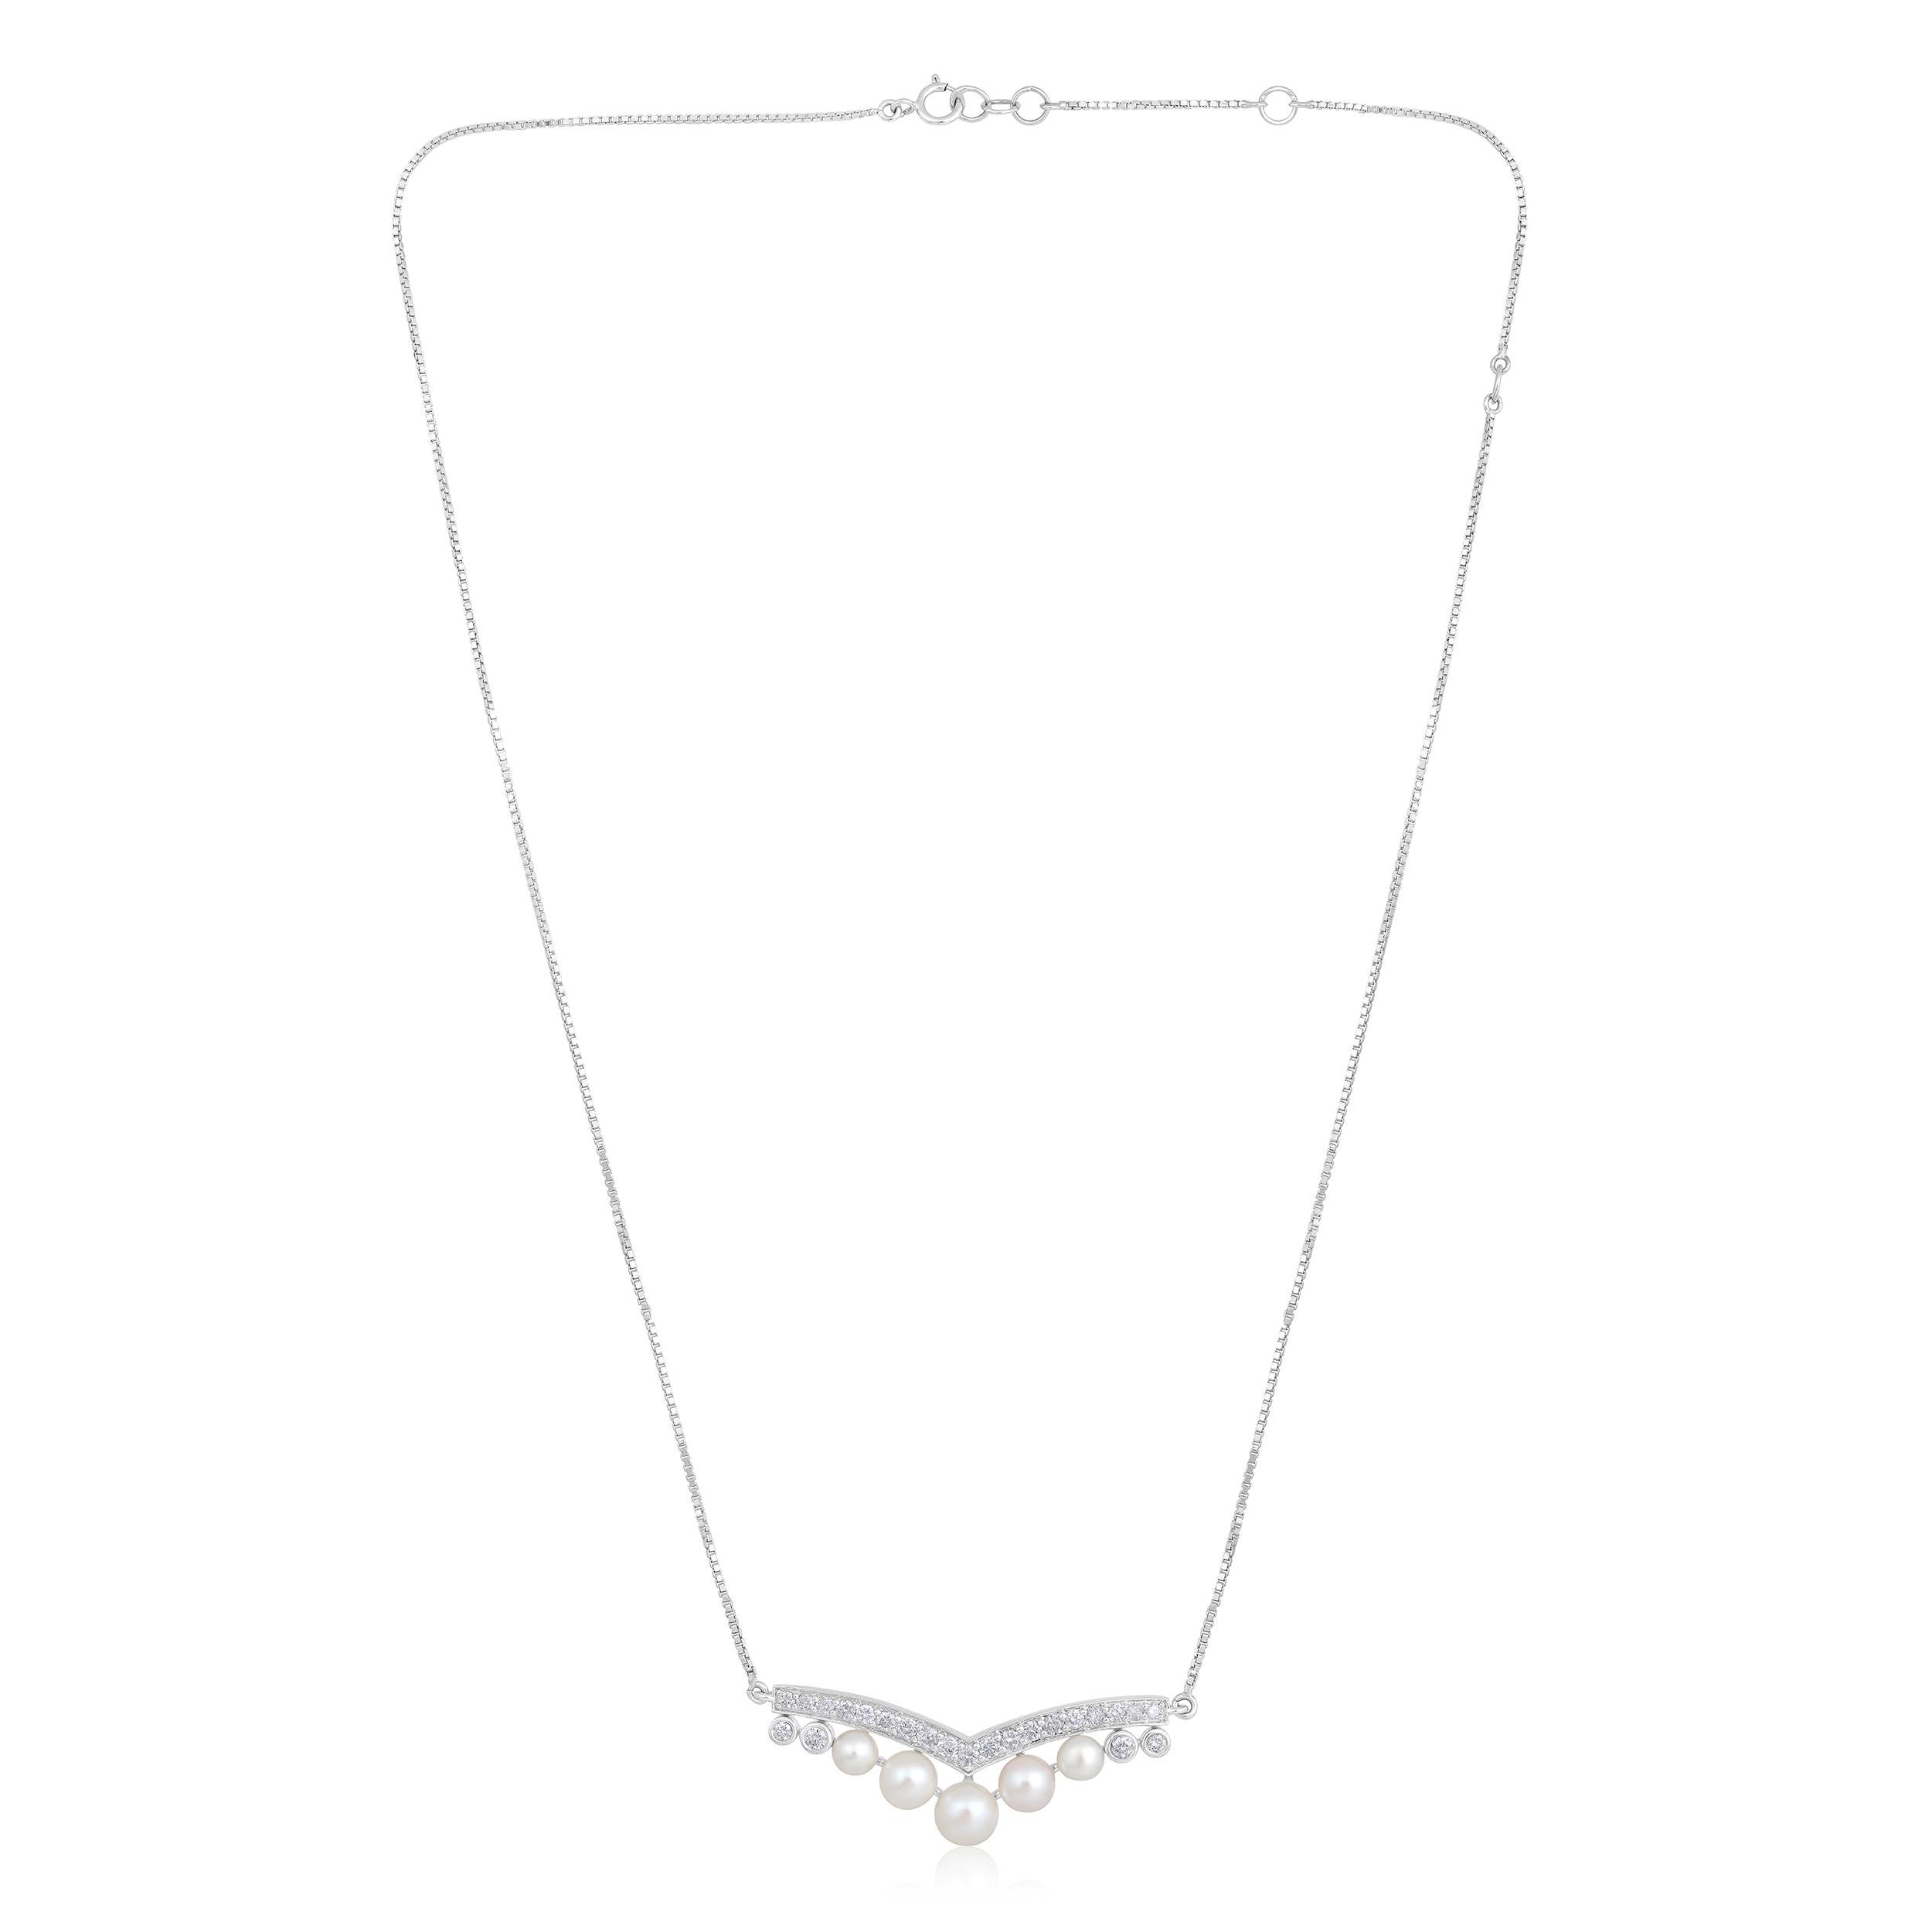 Crafted in 6.44 grams of 14K White Gold, the necklace contains 14 stones of Round Diamonds with a total of 0.61 carat in F-G color and I1-I2 clarity combined with 7 stones of Cultured Pearls with a total of 4.24 carat. The necklace length is 18